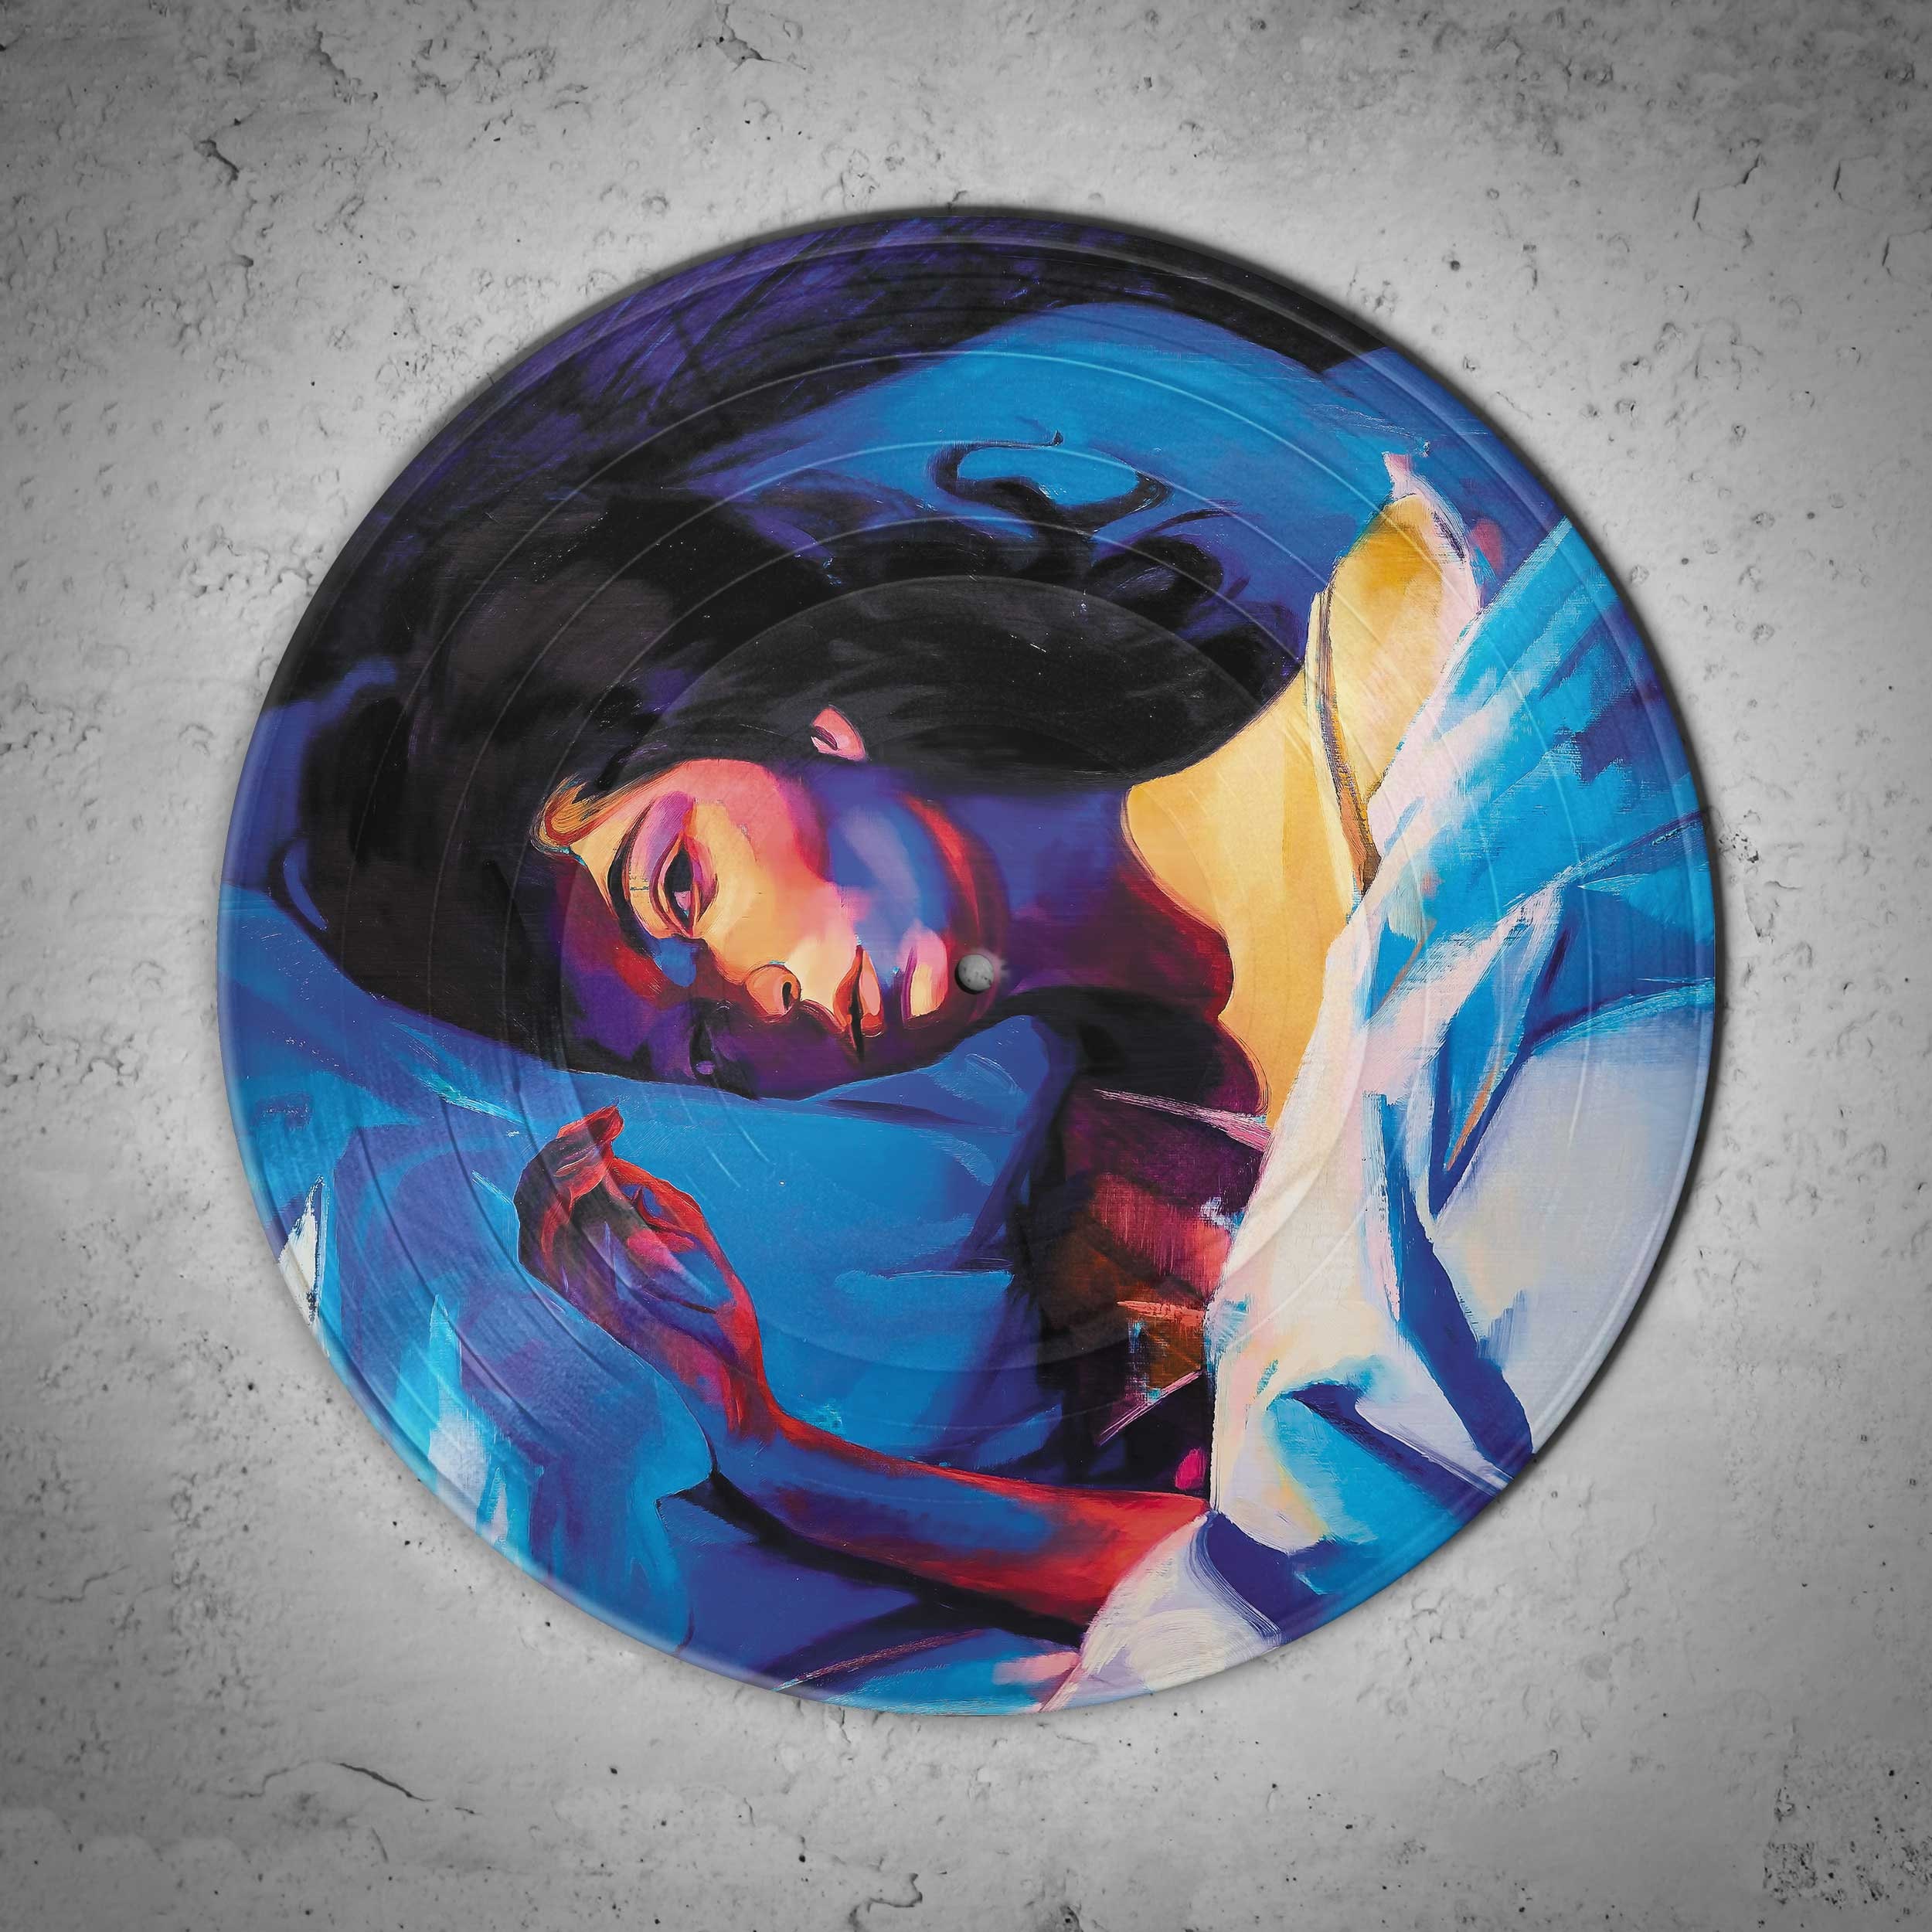 Lorde Melodrama Full Poster Printed On The Retro Vinyl Etsy